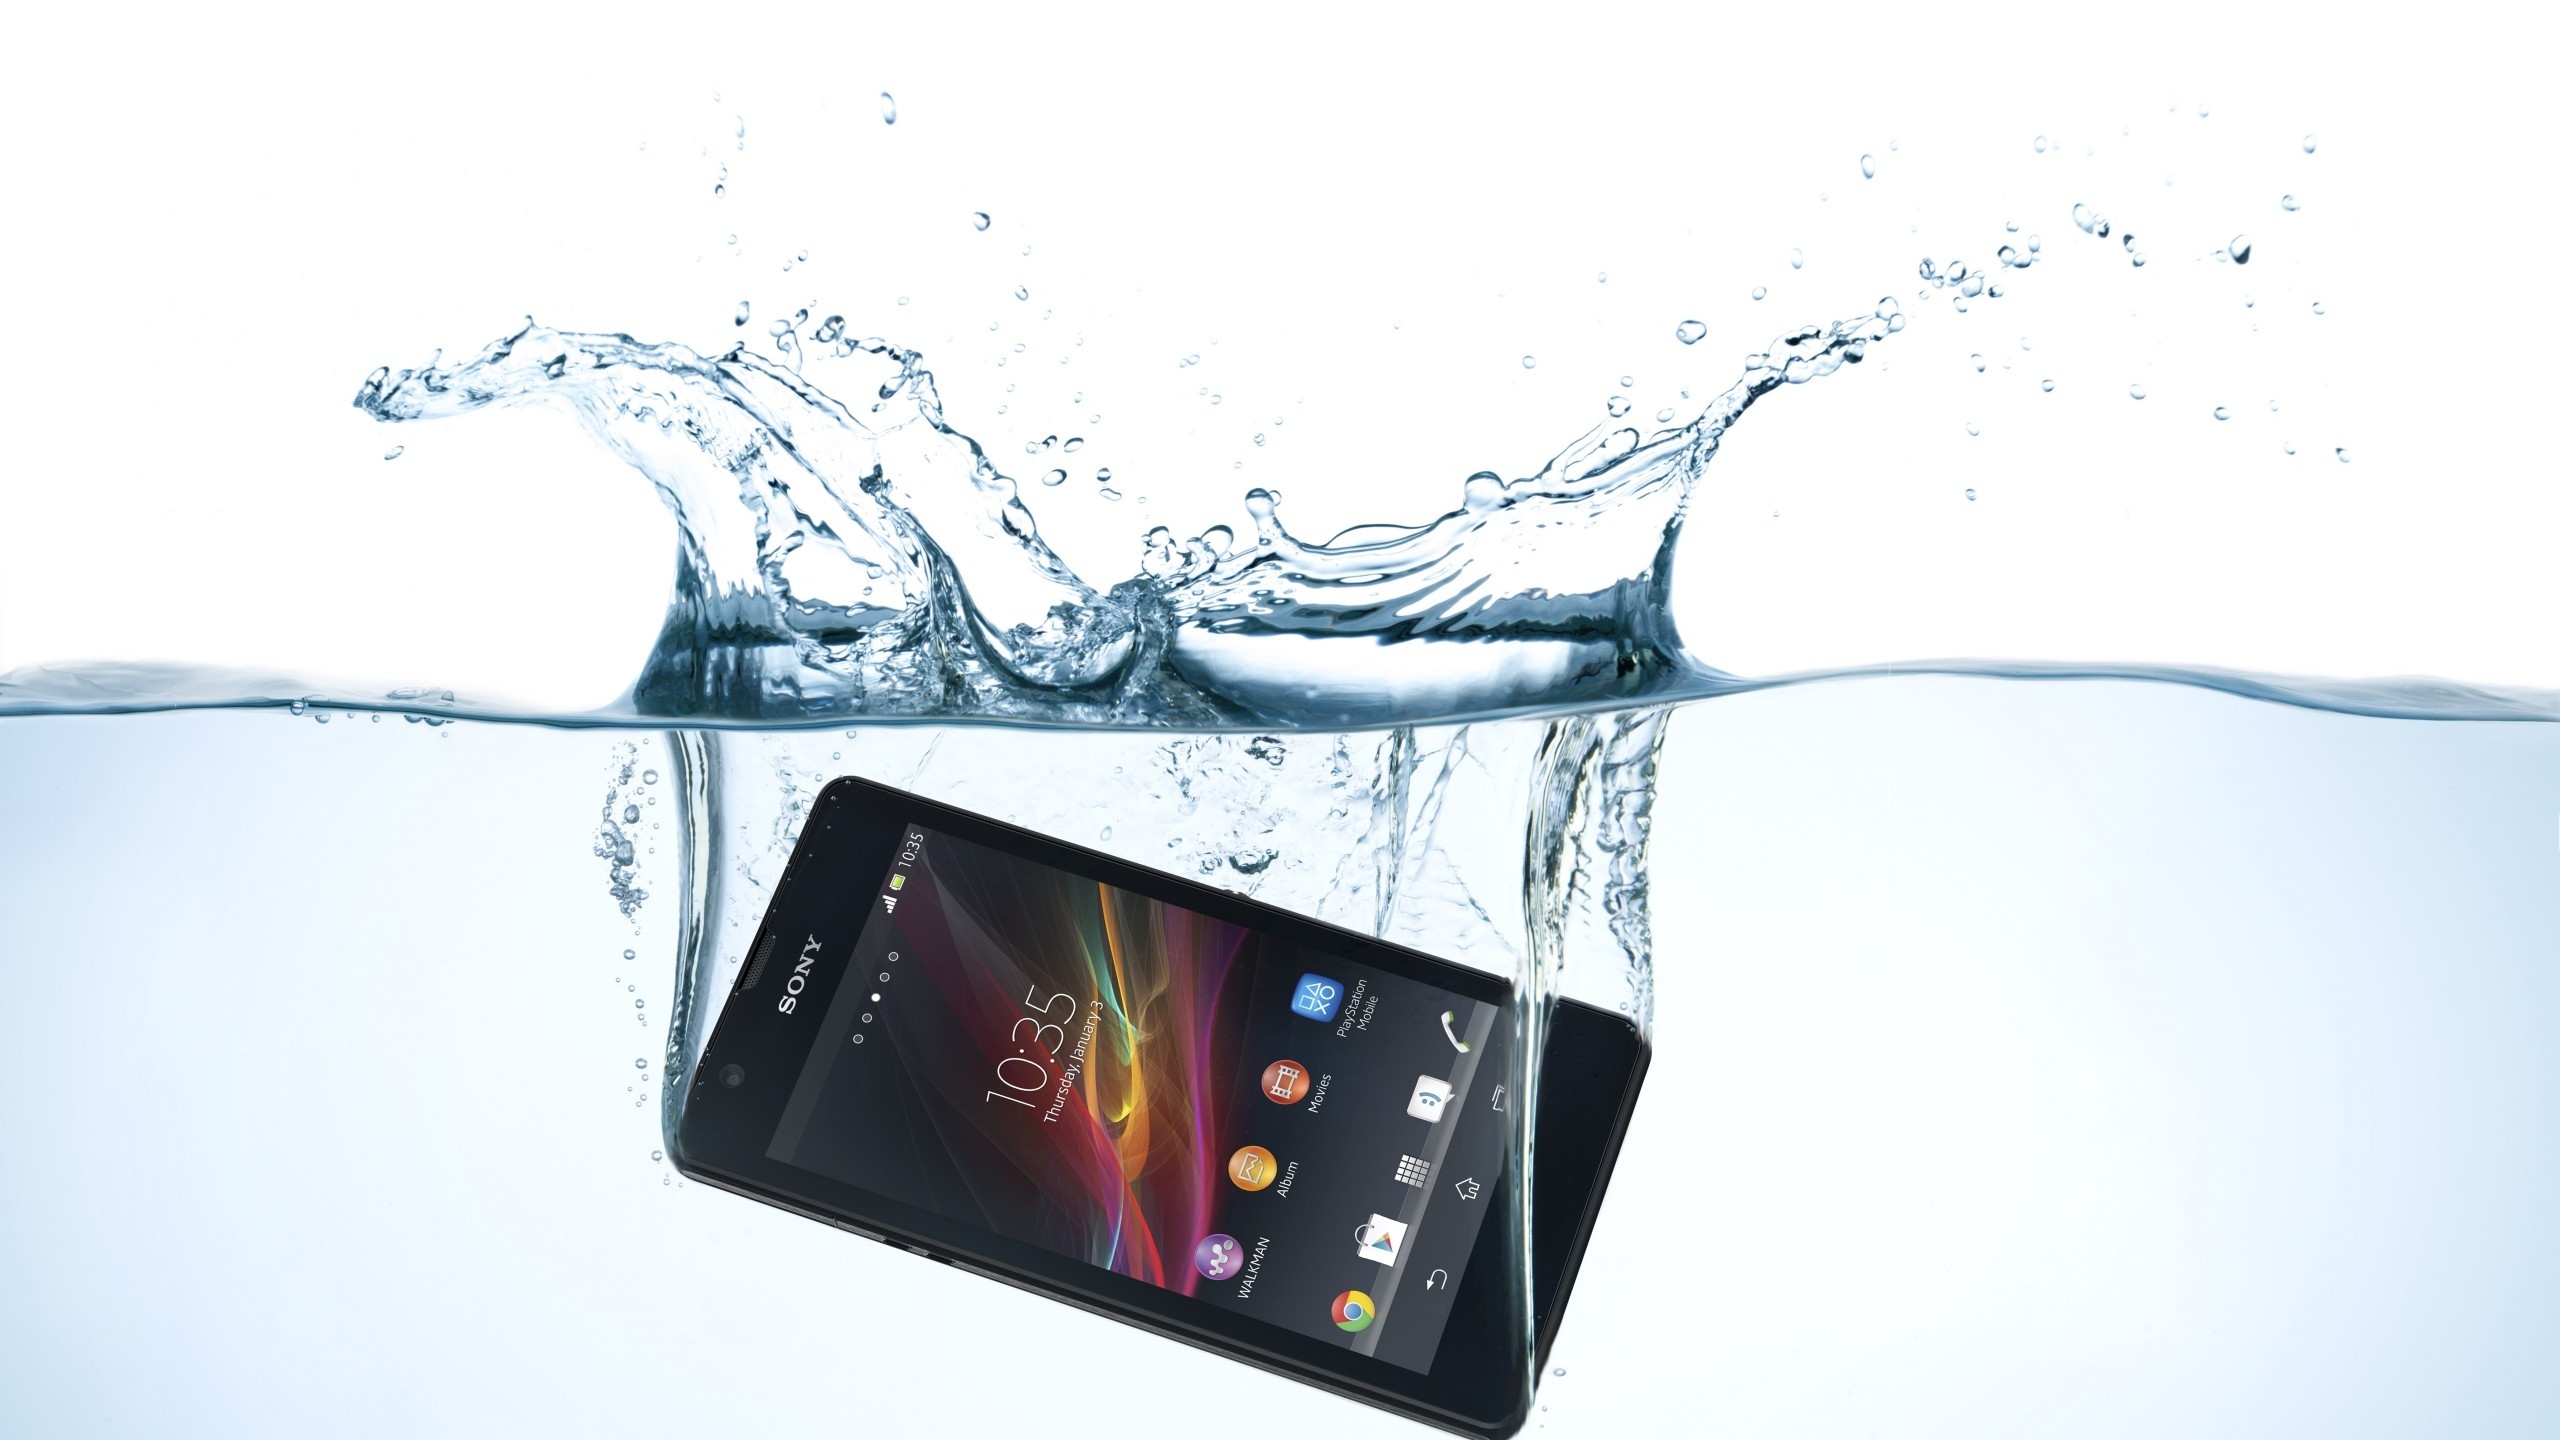 Sony Xperia Swimming for 2560x1440 HDTV resolution